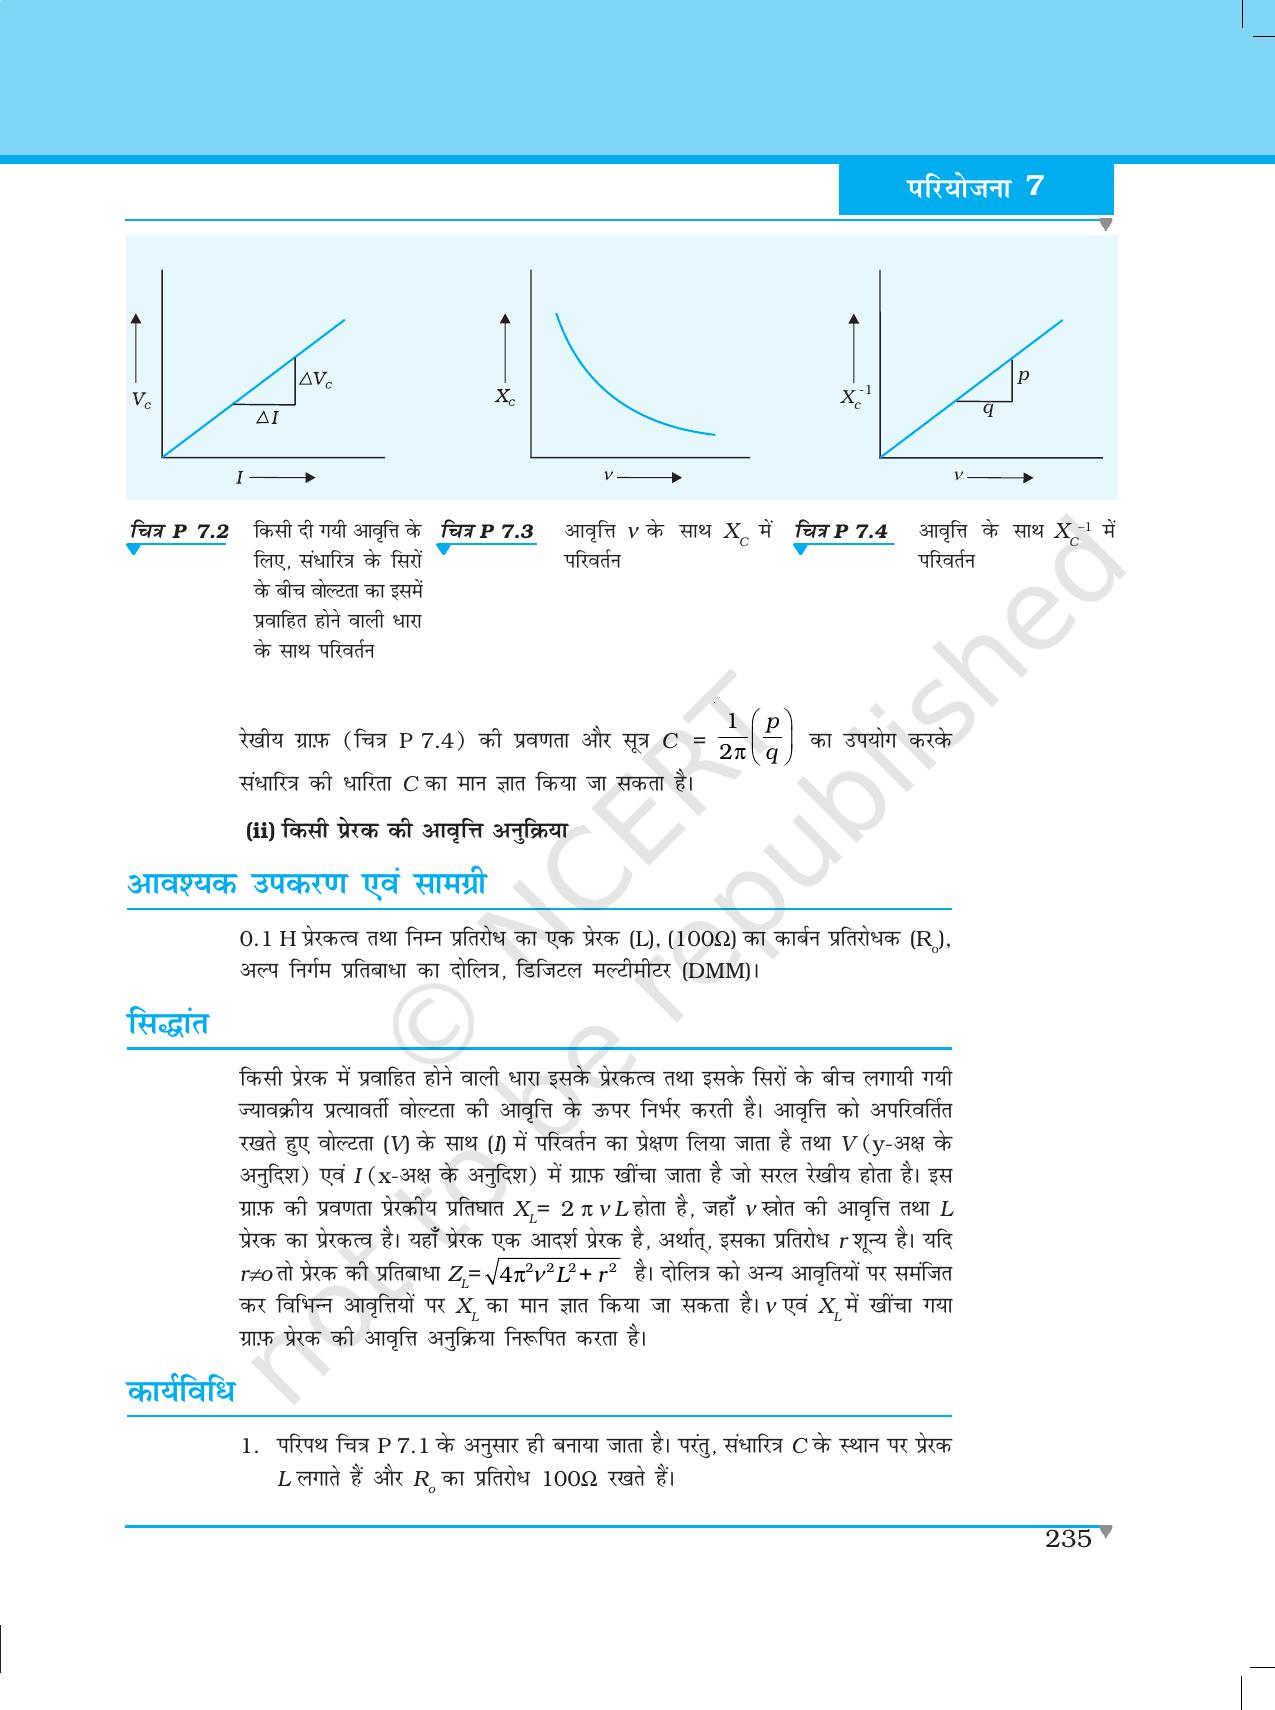 NCERT Laboratory Manuals for Class XII भौतिकी - परियोजना (1 - 7) - Page 29